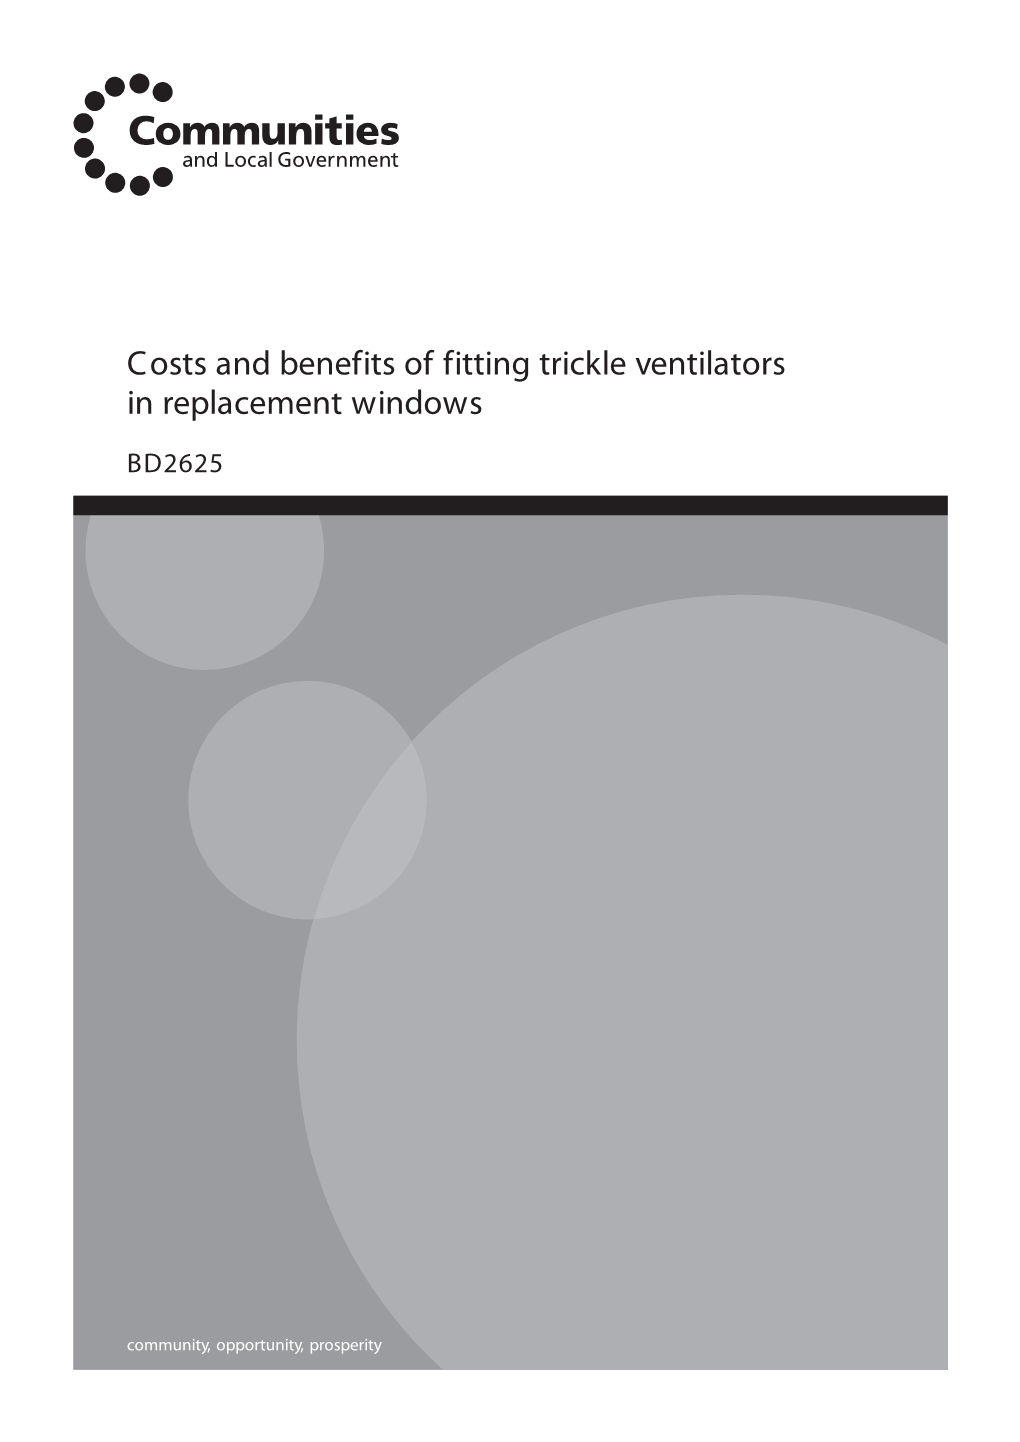 Cost and Benefits of Fitting Trickle Ventilators